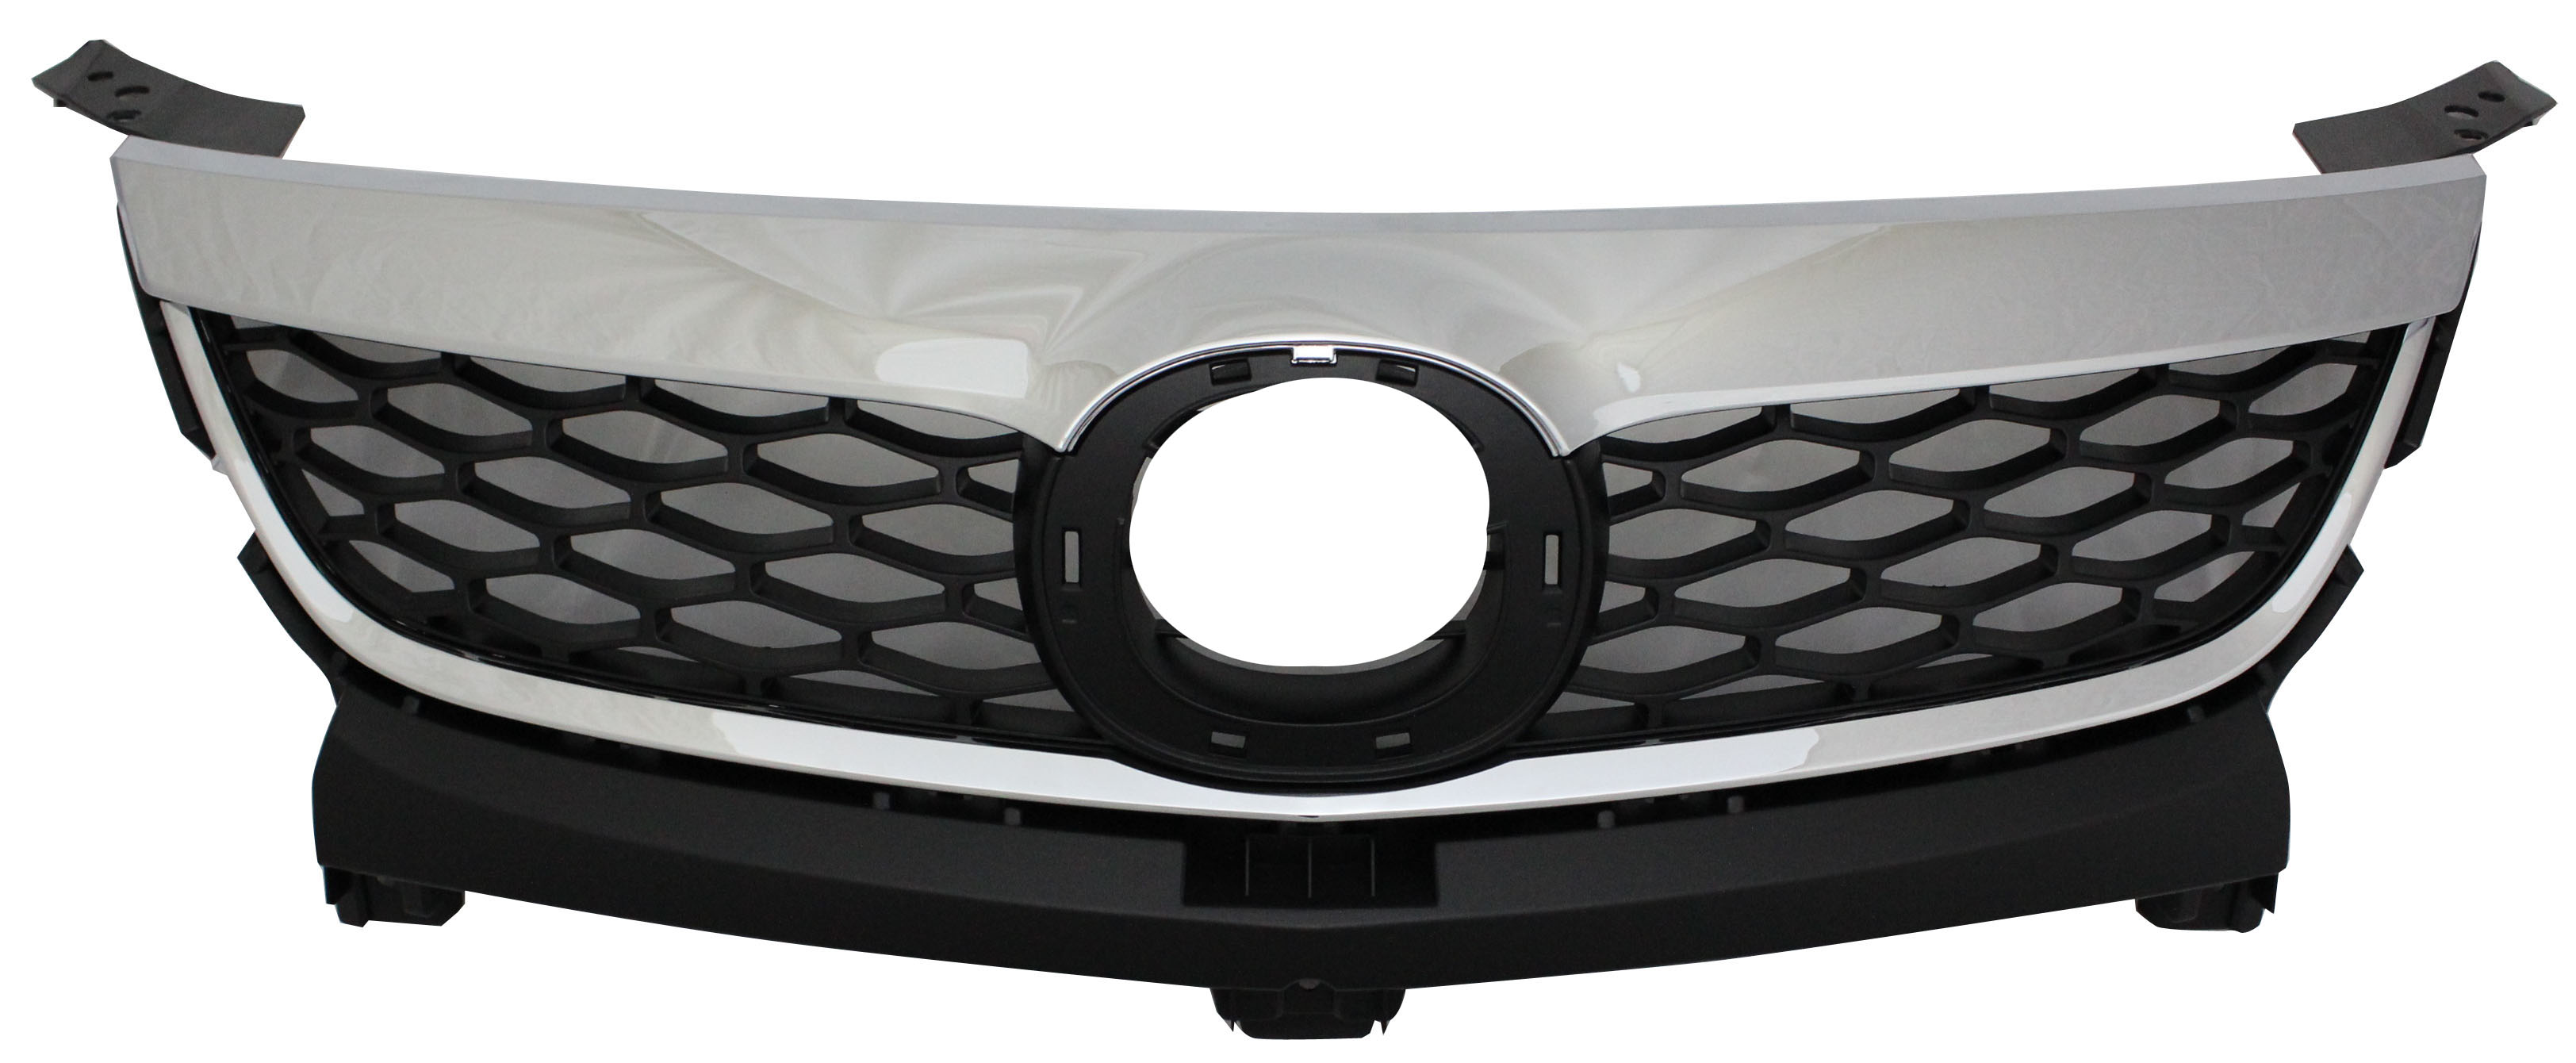 Aftermarket GRILLES for MAZDA - CX-9, CX-9,10-12,Grille assy